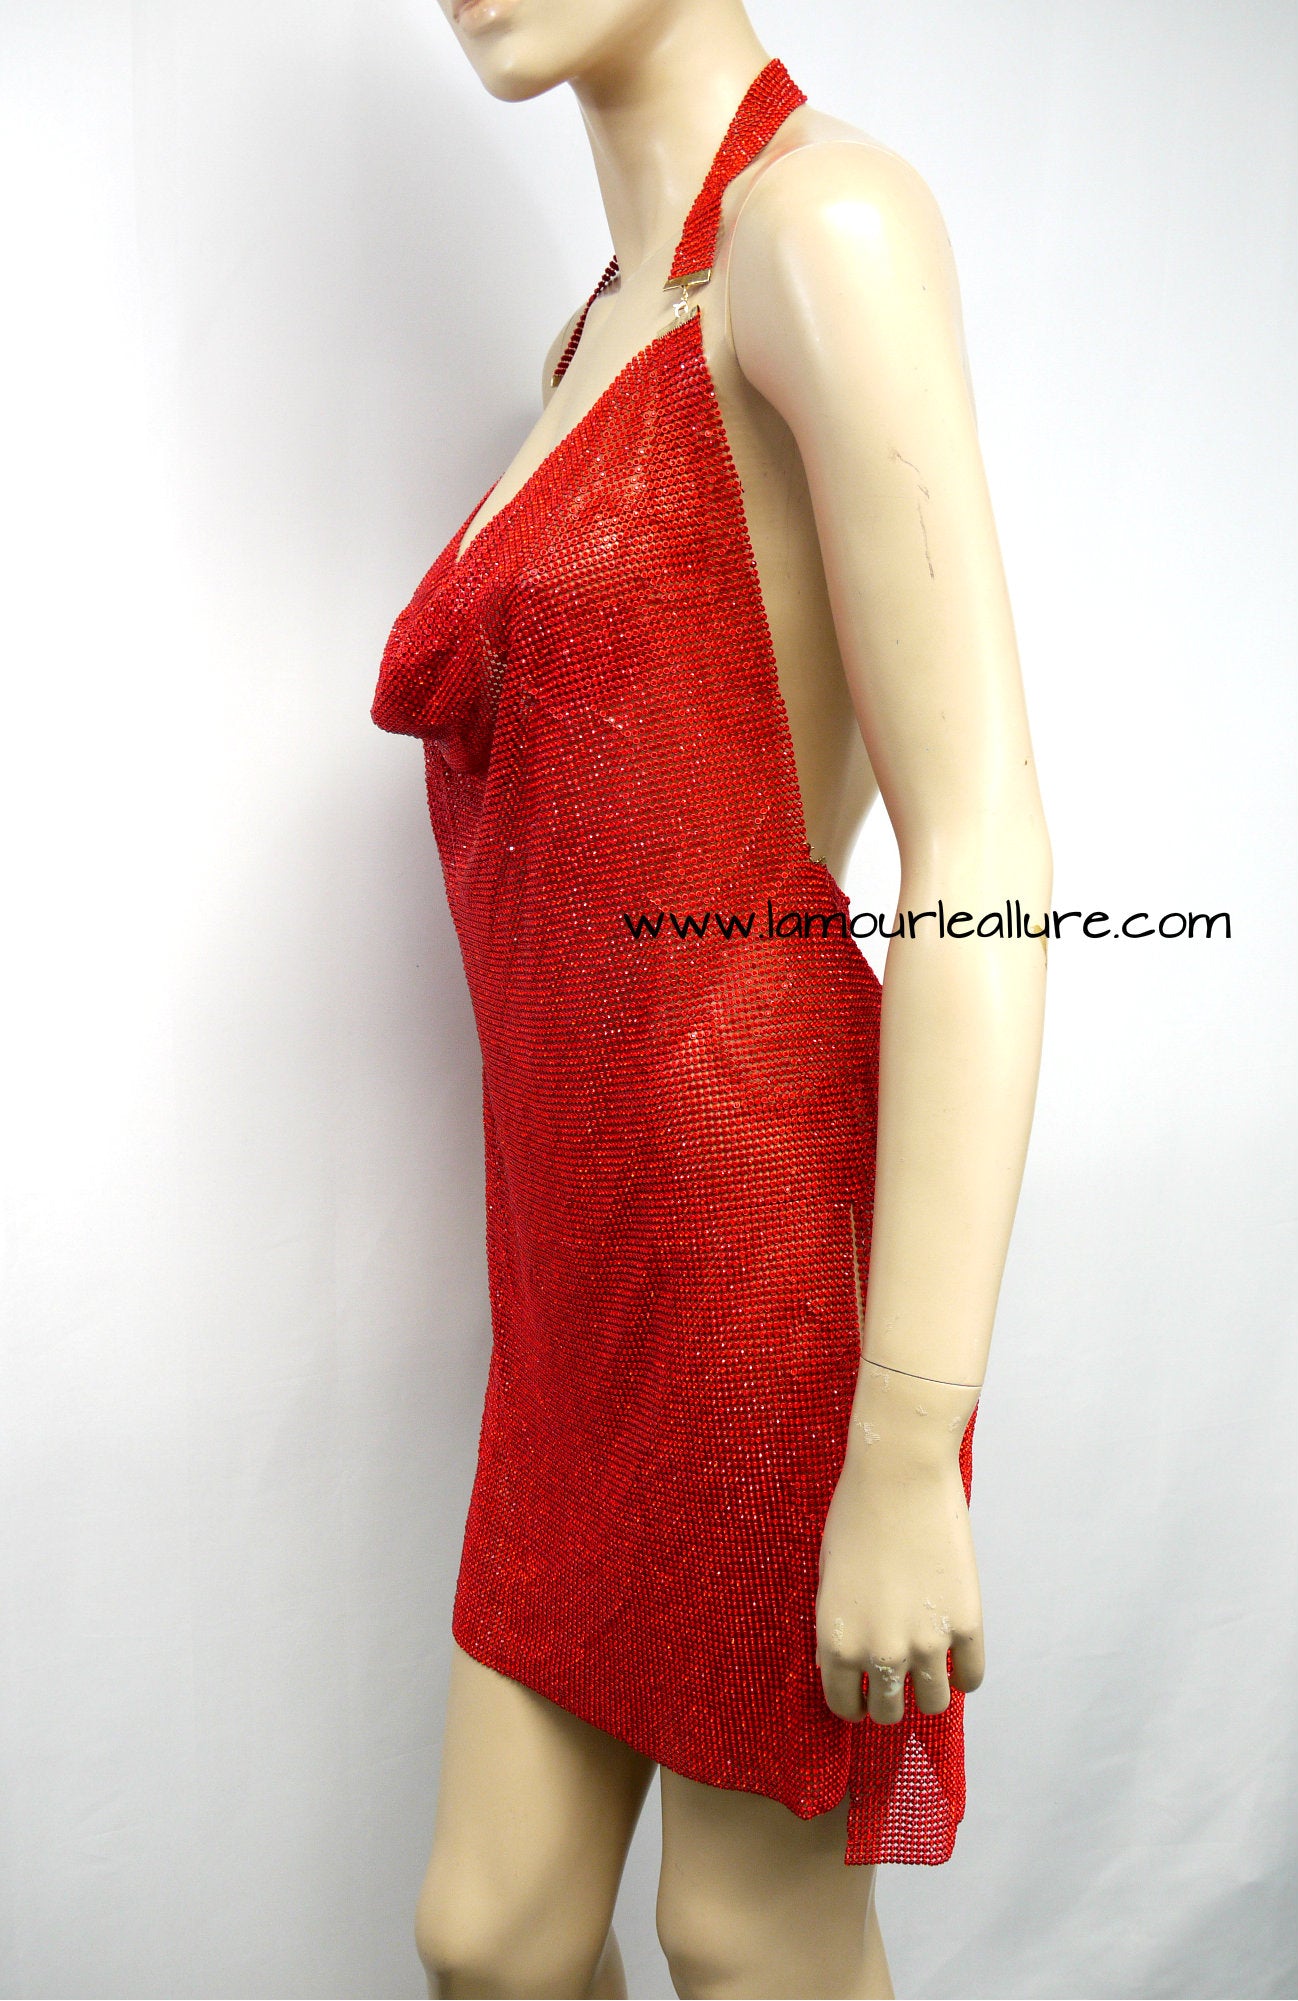 Red Sexy Luxury Party Metal Crystal Diamond Chain Halter Dress - Backless